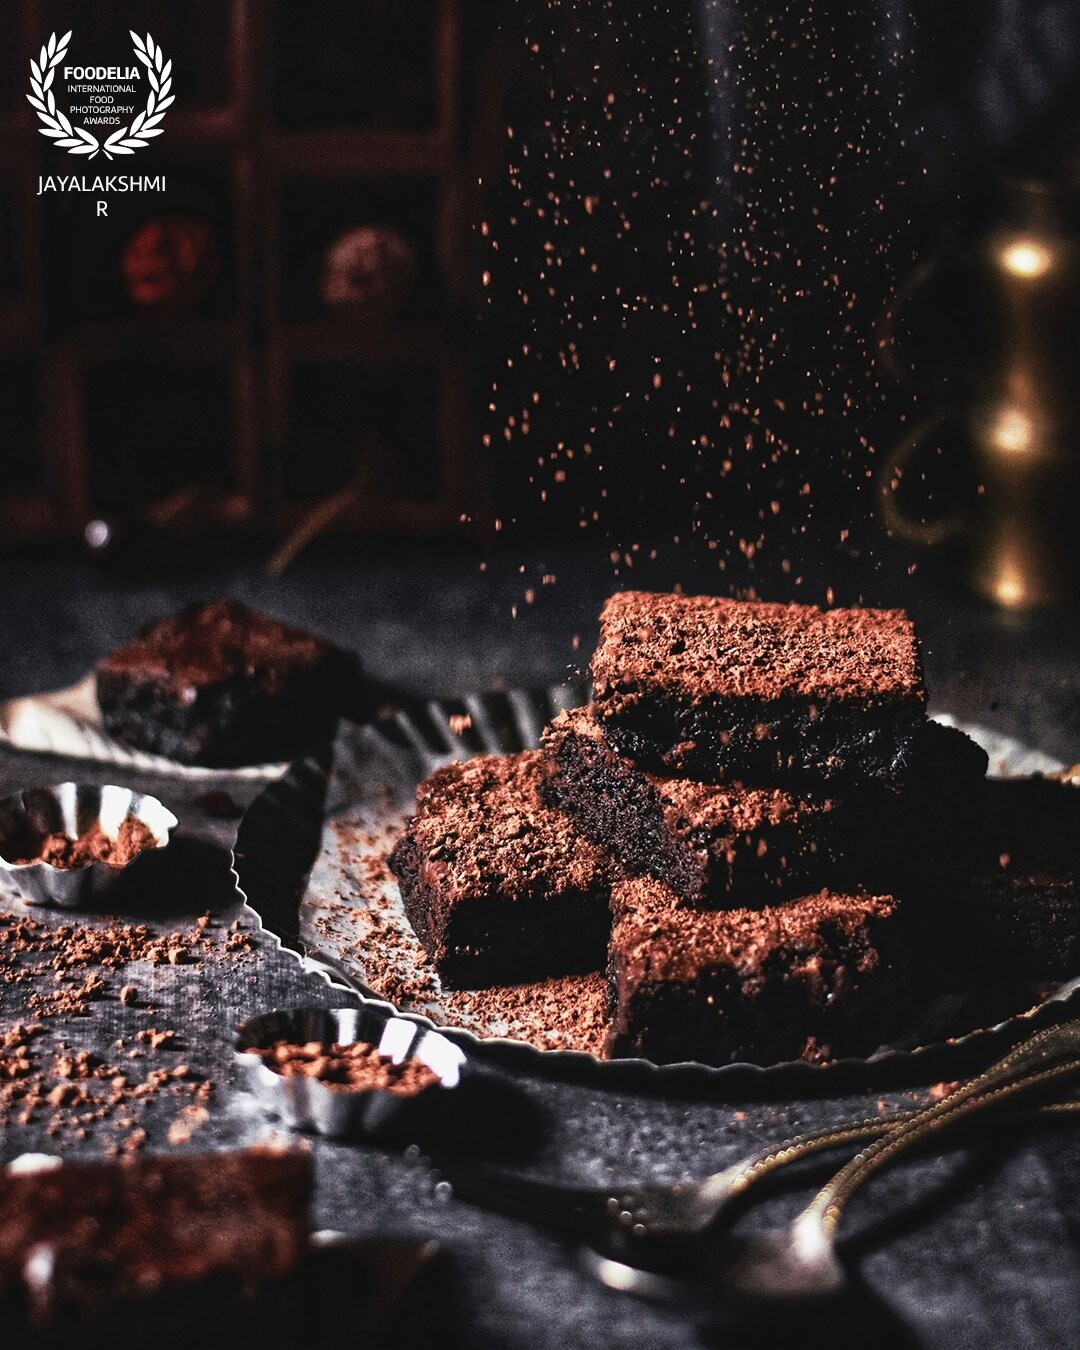 Some brownies for the festive season . Added some drama  to the scene by doing a  cocoa dusting . Shot in natural light against a west facing window.